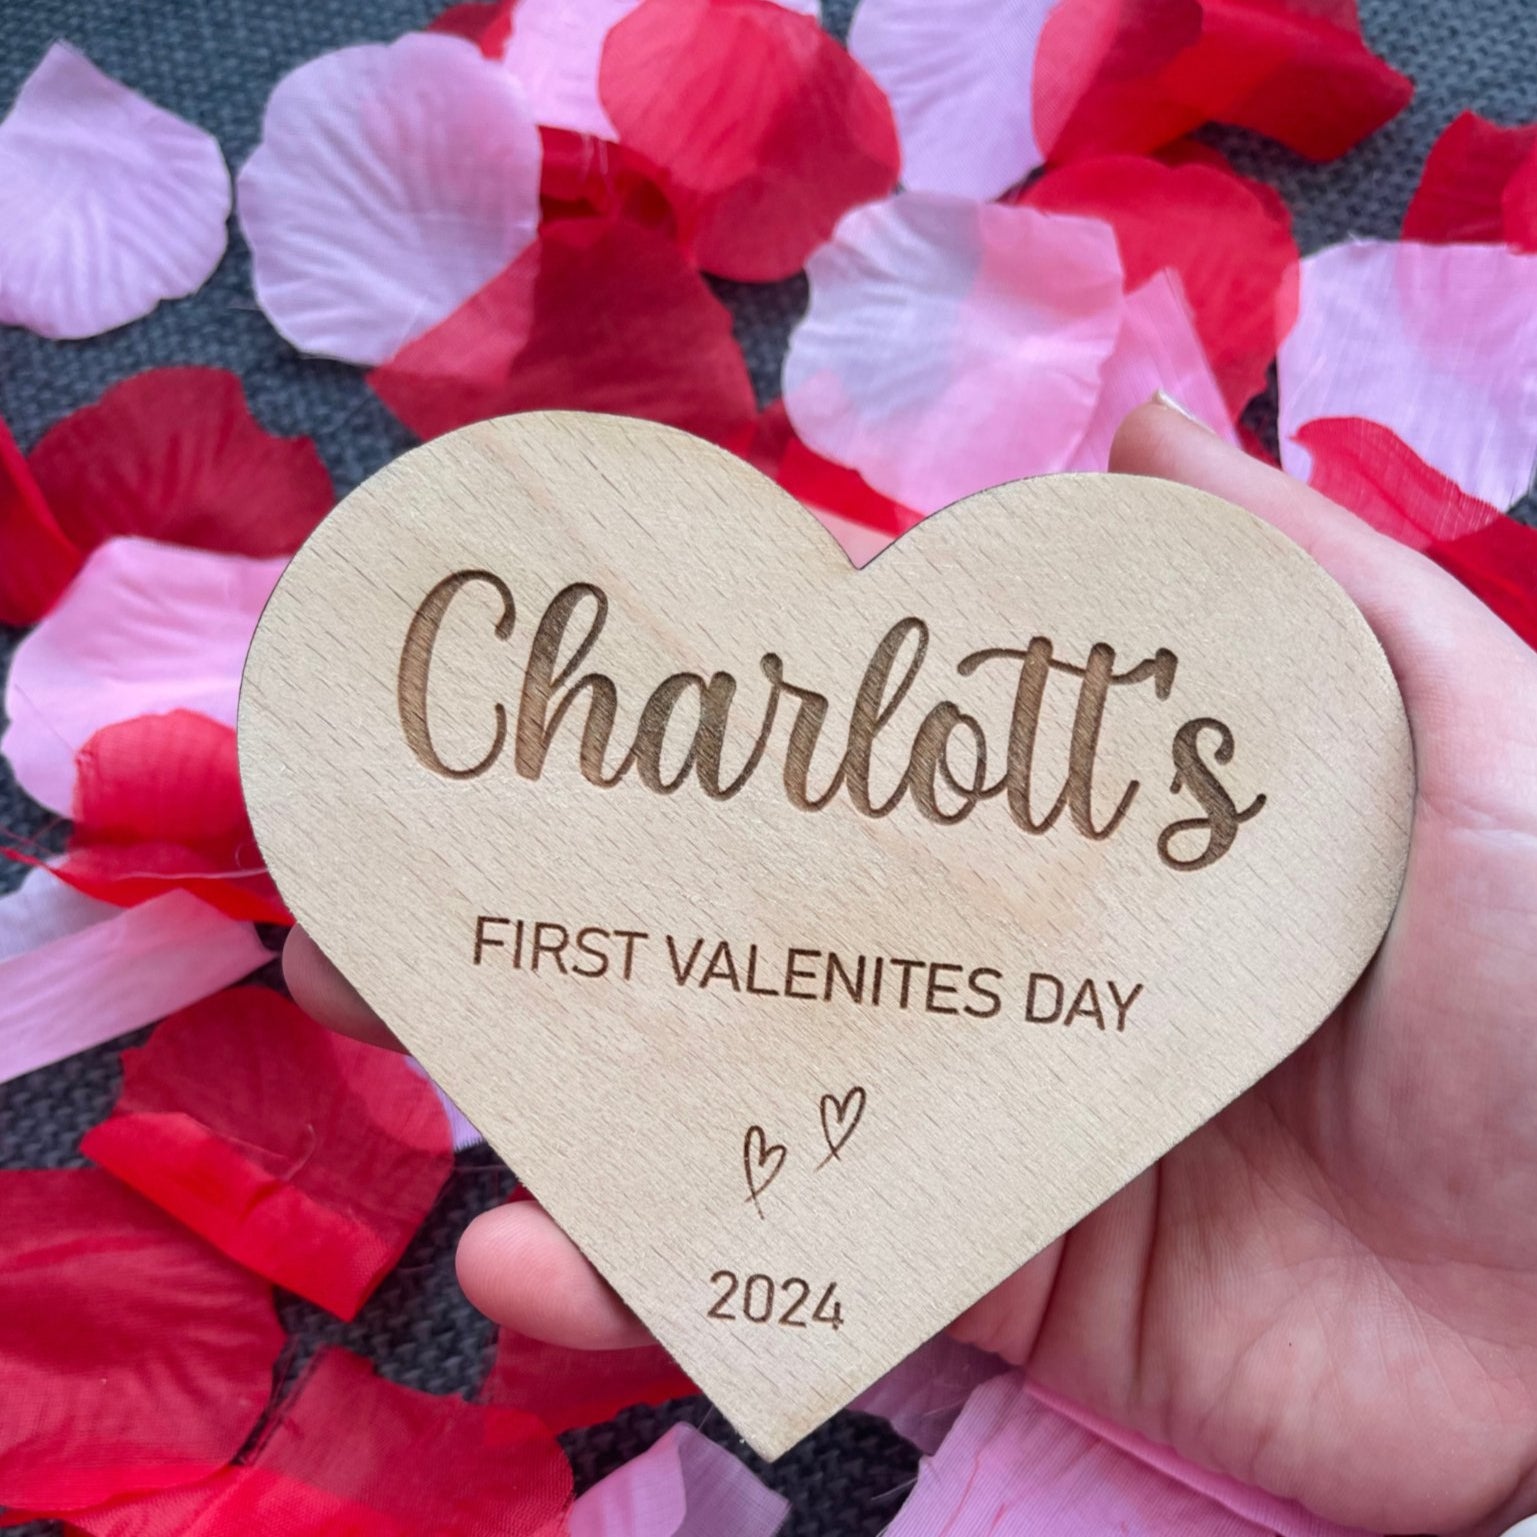 Cherish your baby's first Valentine's with a personalised heart-shaped plaque, meticulously engraved with your baby's name. Crafted from quality beech veneer, the plaque measures 115mm x 100mm, 4mm thick – an ideal gift for new parents, adding beauty to baby photographs.